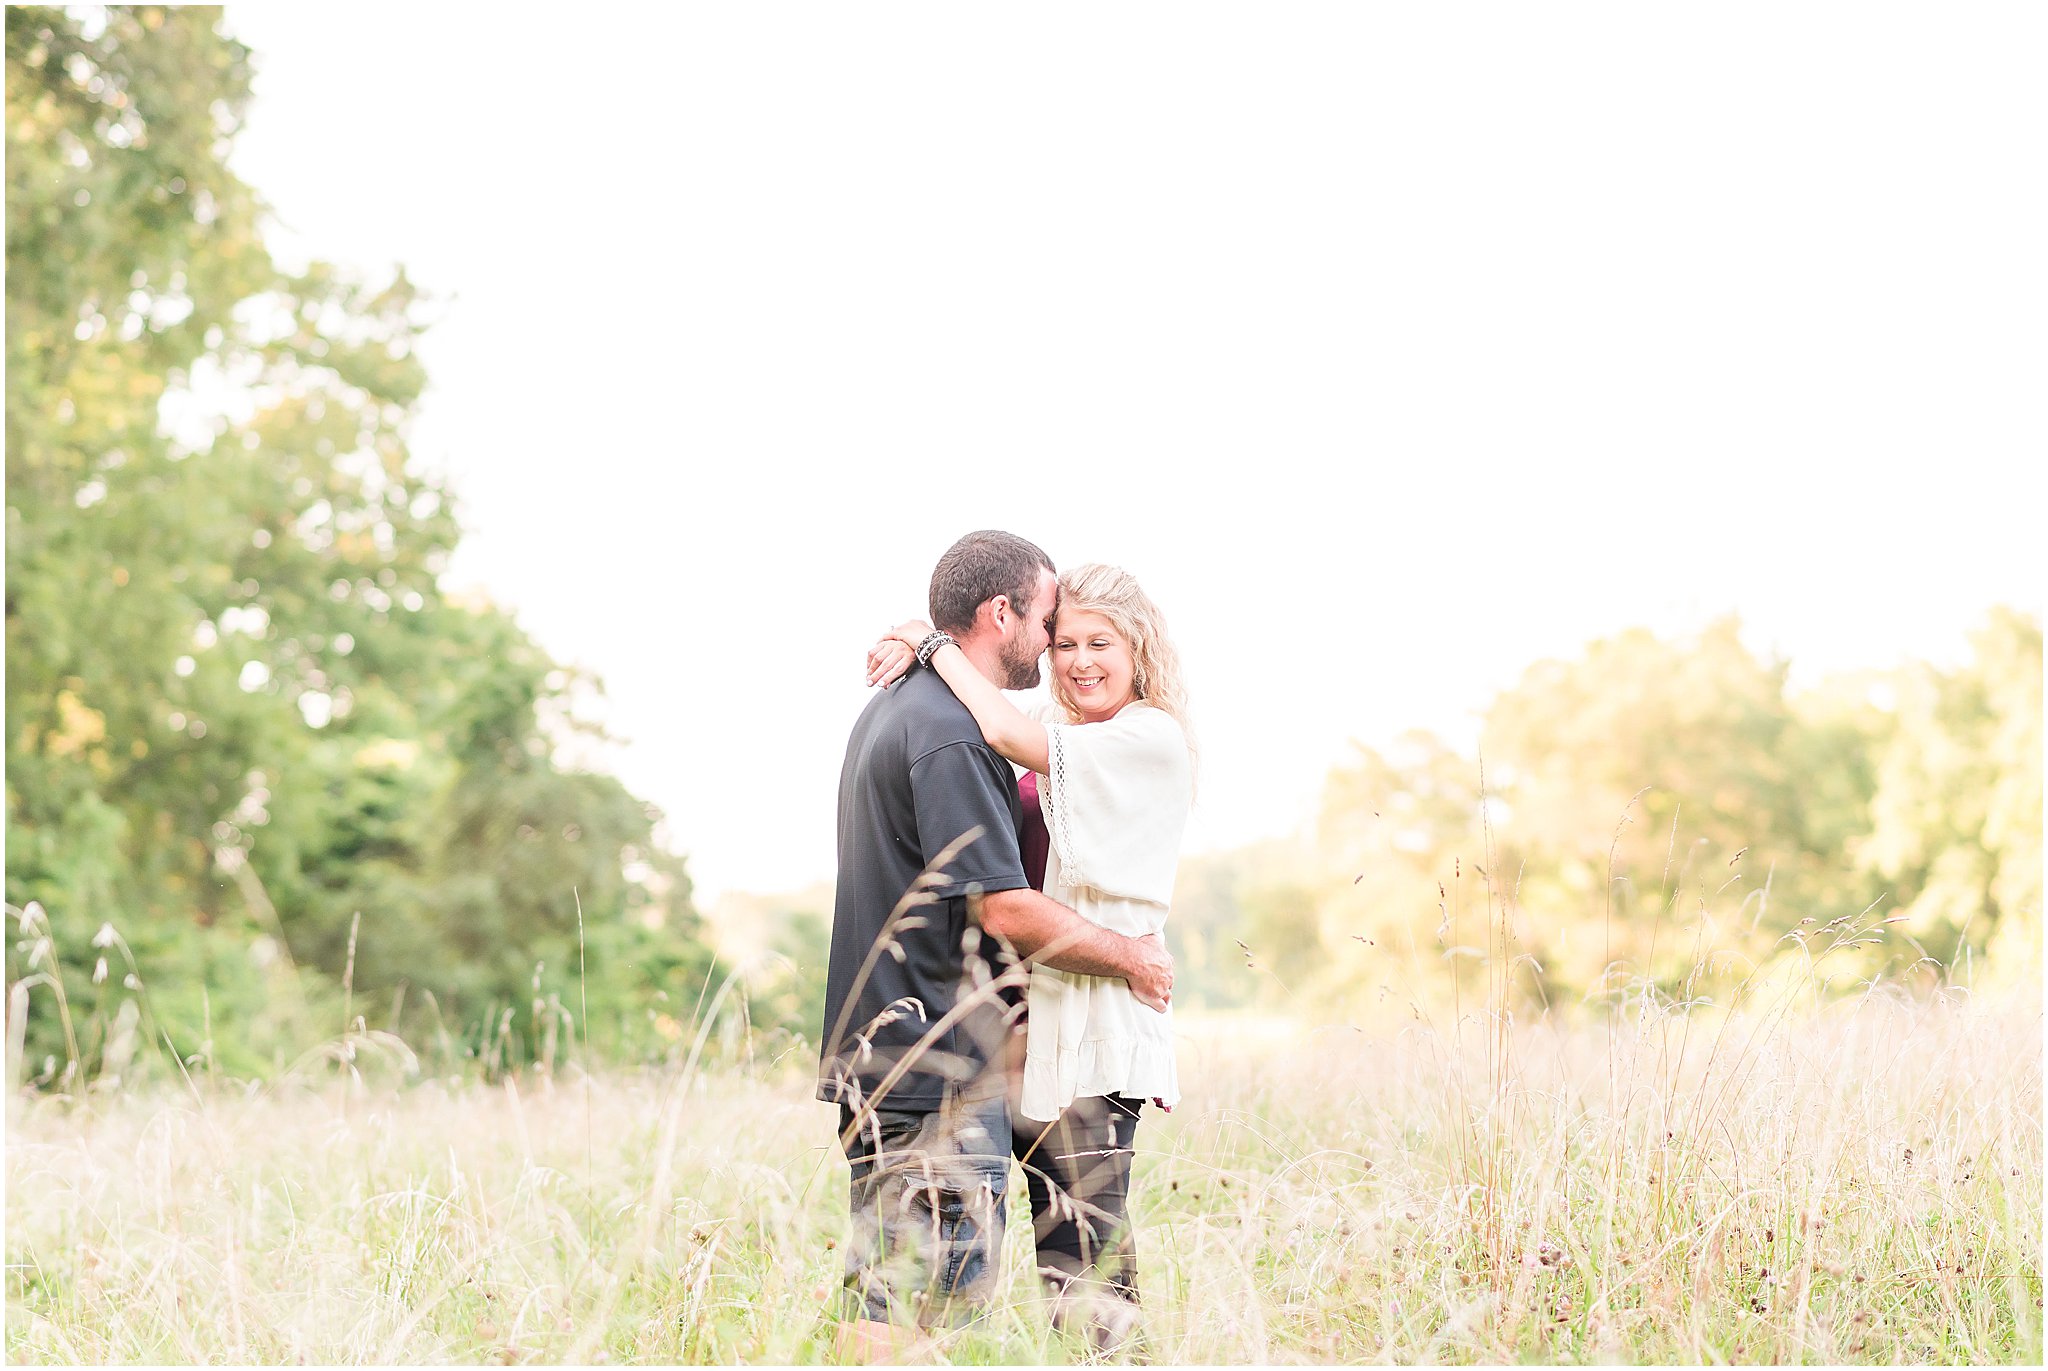 Bloomfield Indiana engagement session with guy nuzzling girl's temple while standing in field